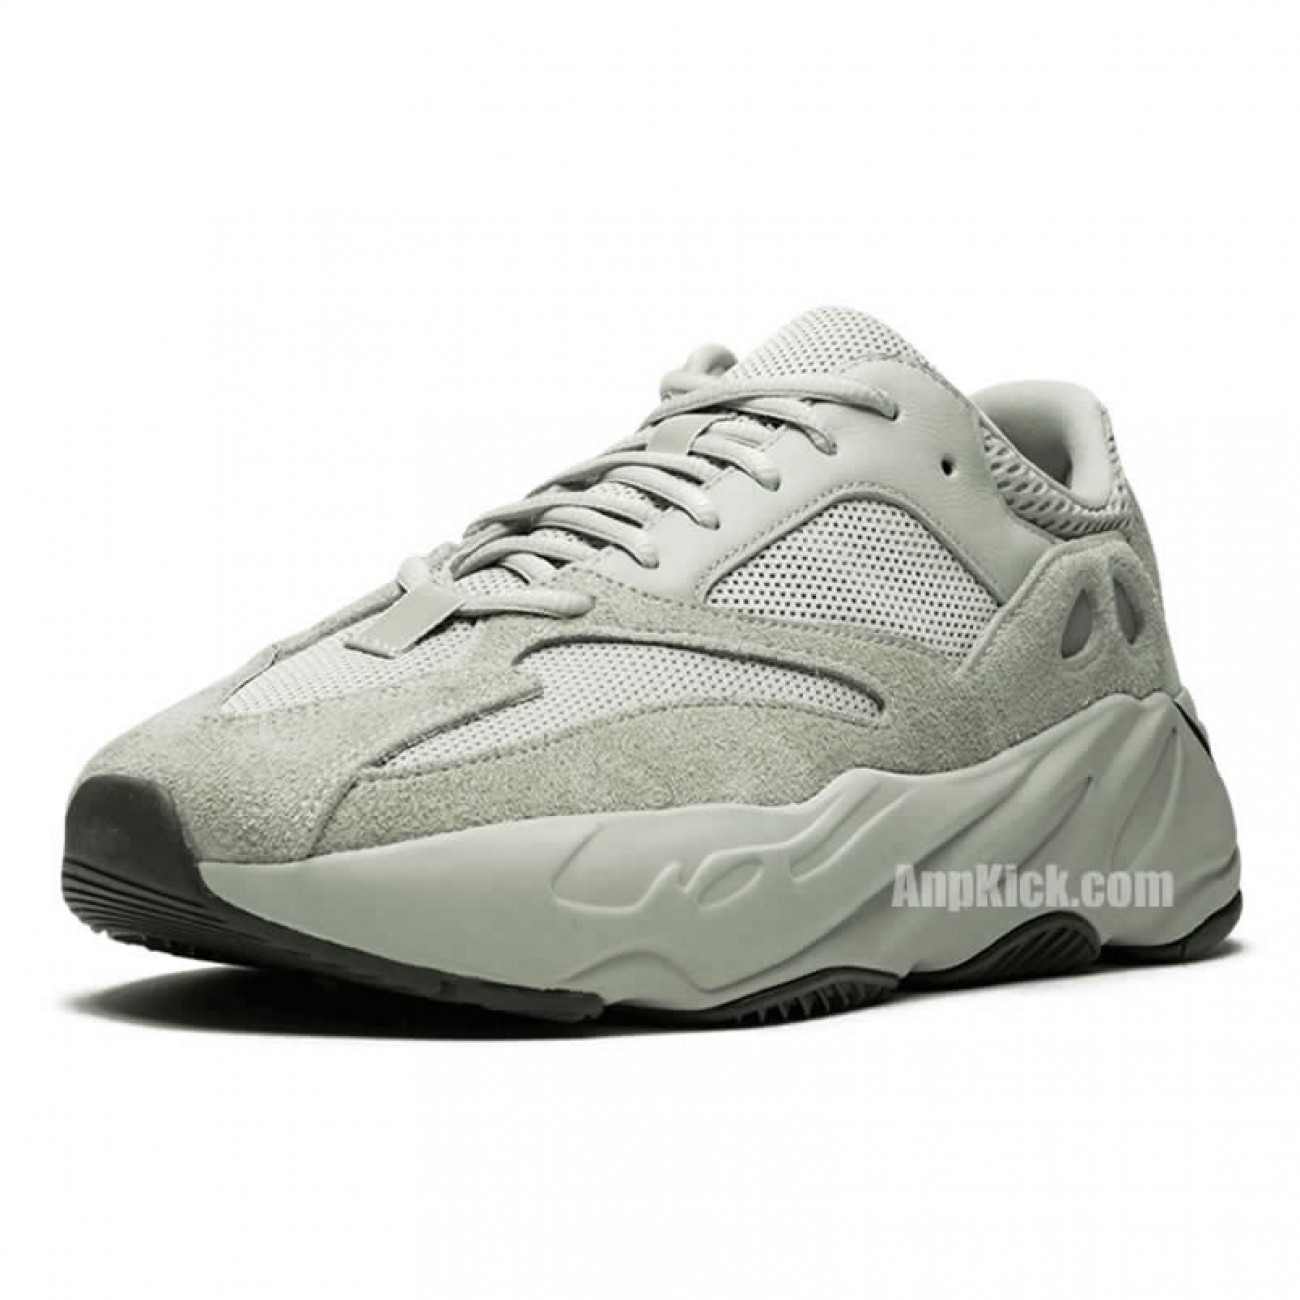 adidas Yeezy 700 "Salt" On Feet Outfit Reflective Price Release Date EG7487